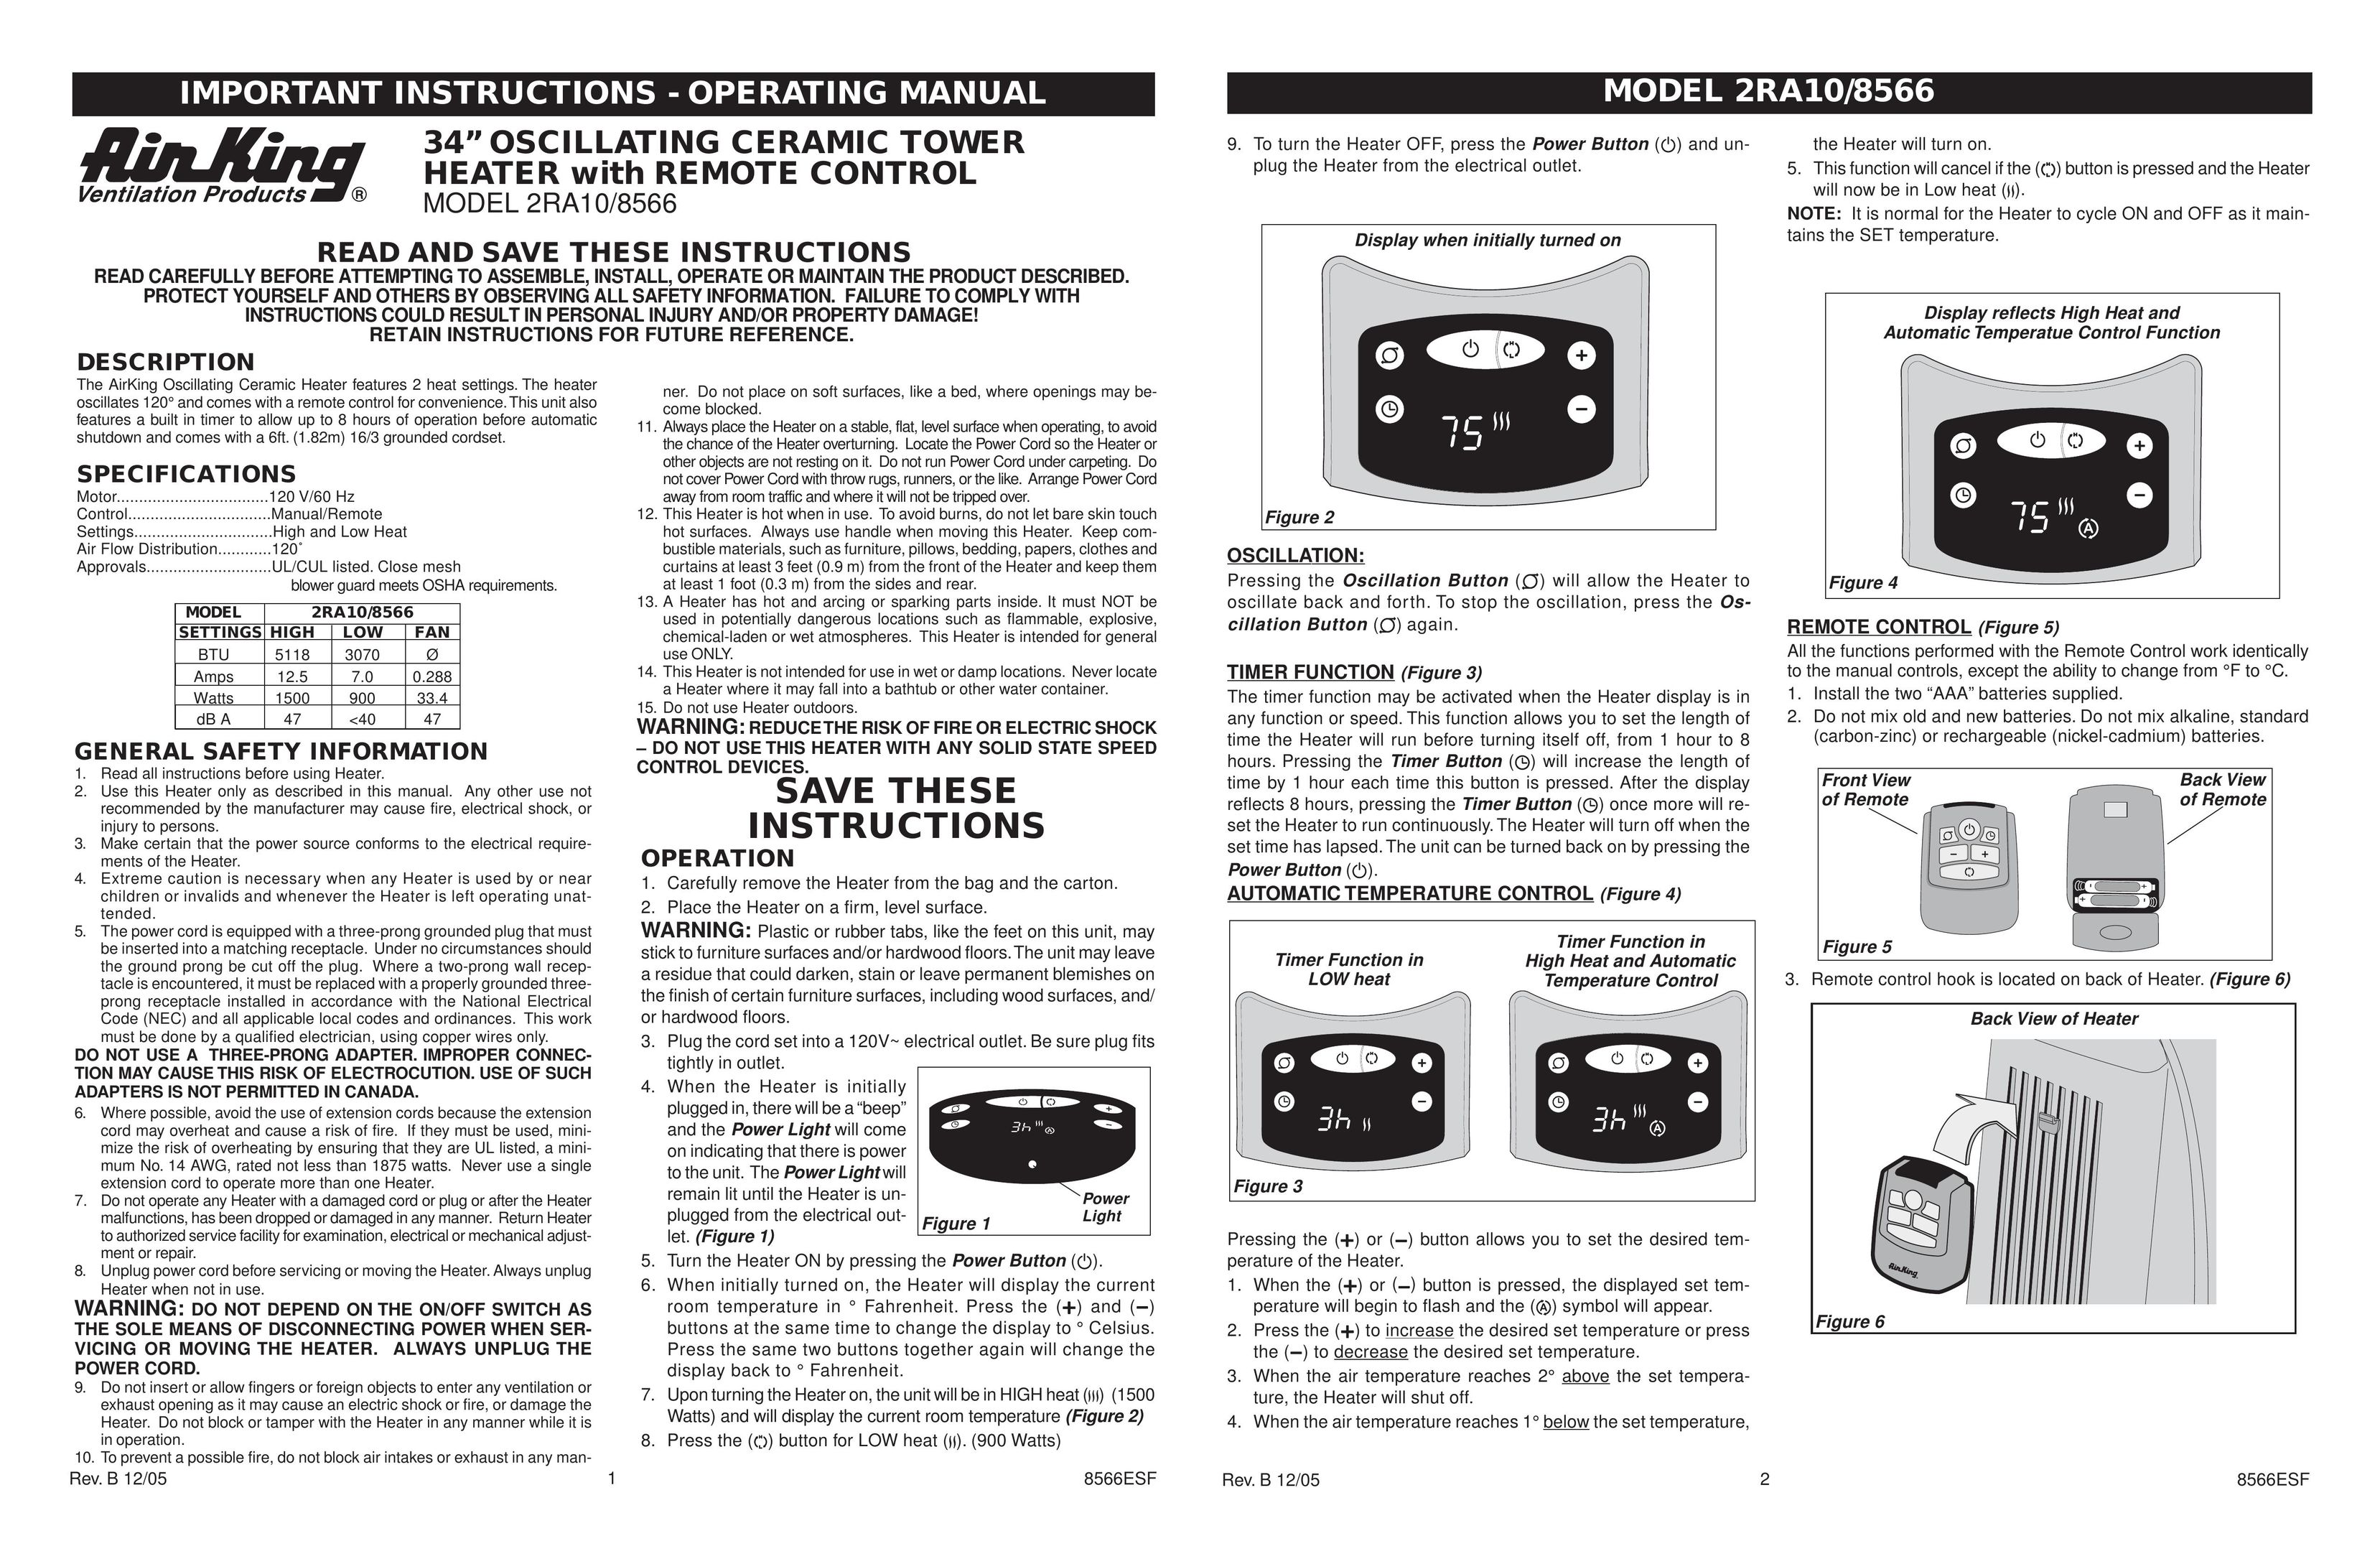 Air King 2RA10/8566 Air Conditioner User Manual (Page 1)